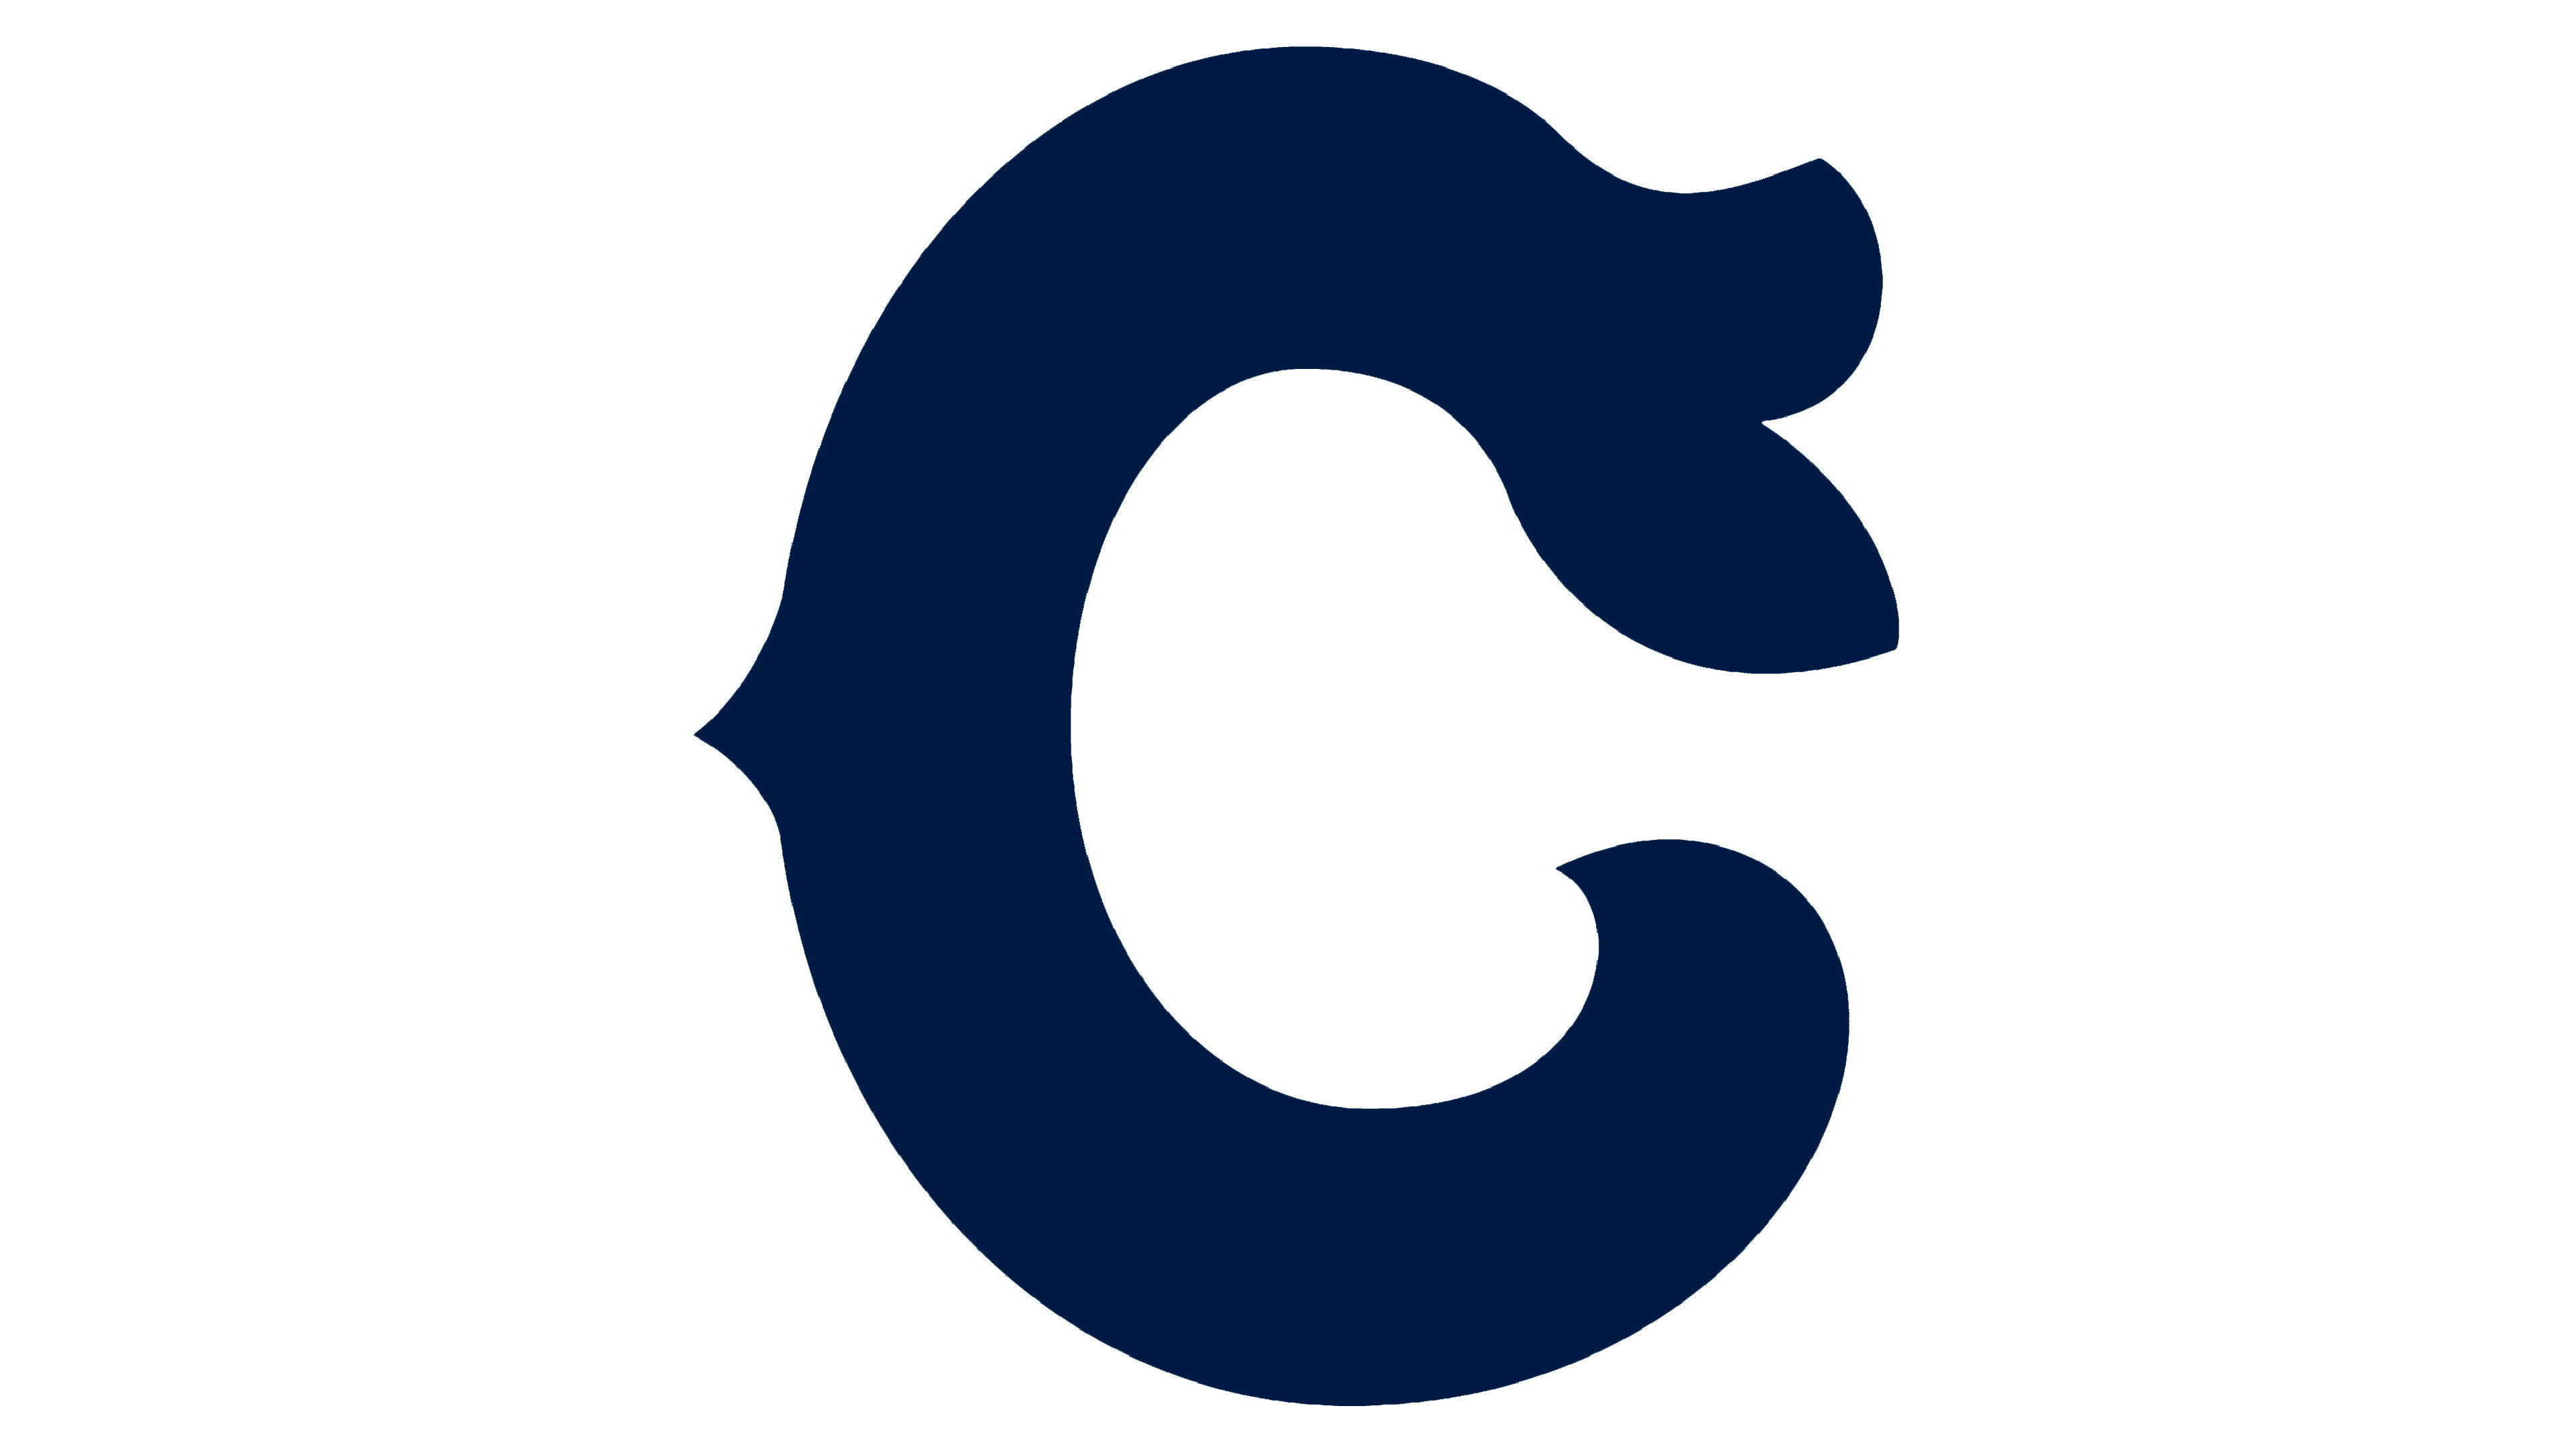 Cleveland Guardians Logo and sign, new logo meaning and history, PNG, SVG